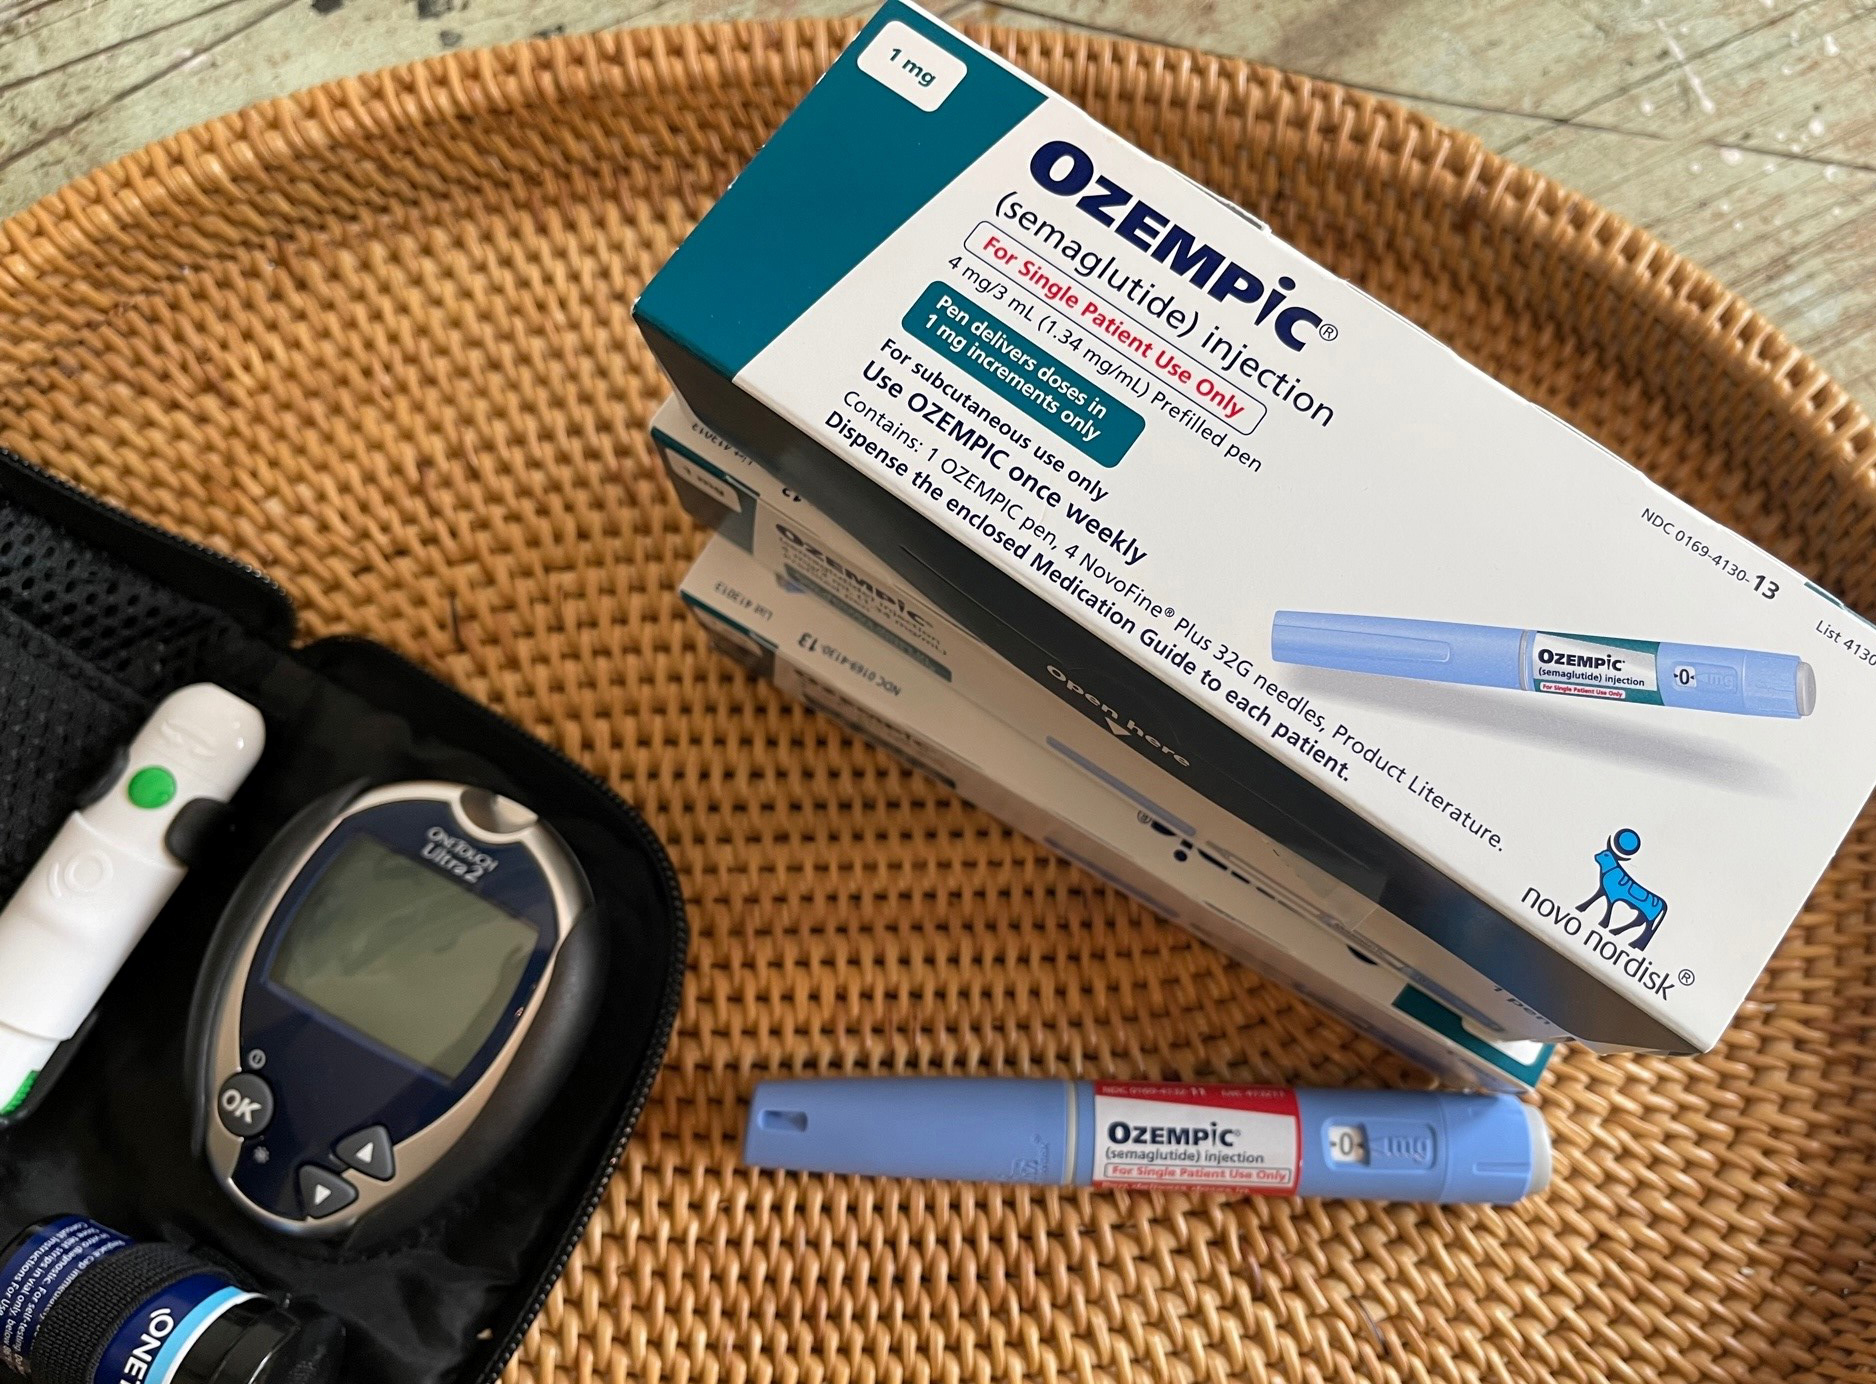 Popularity of Ozempic weight loss trend frustrates diabetic patients